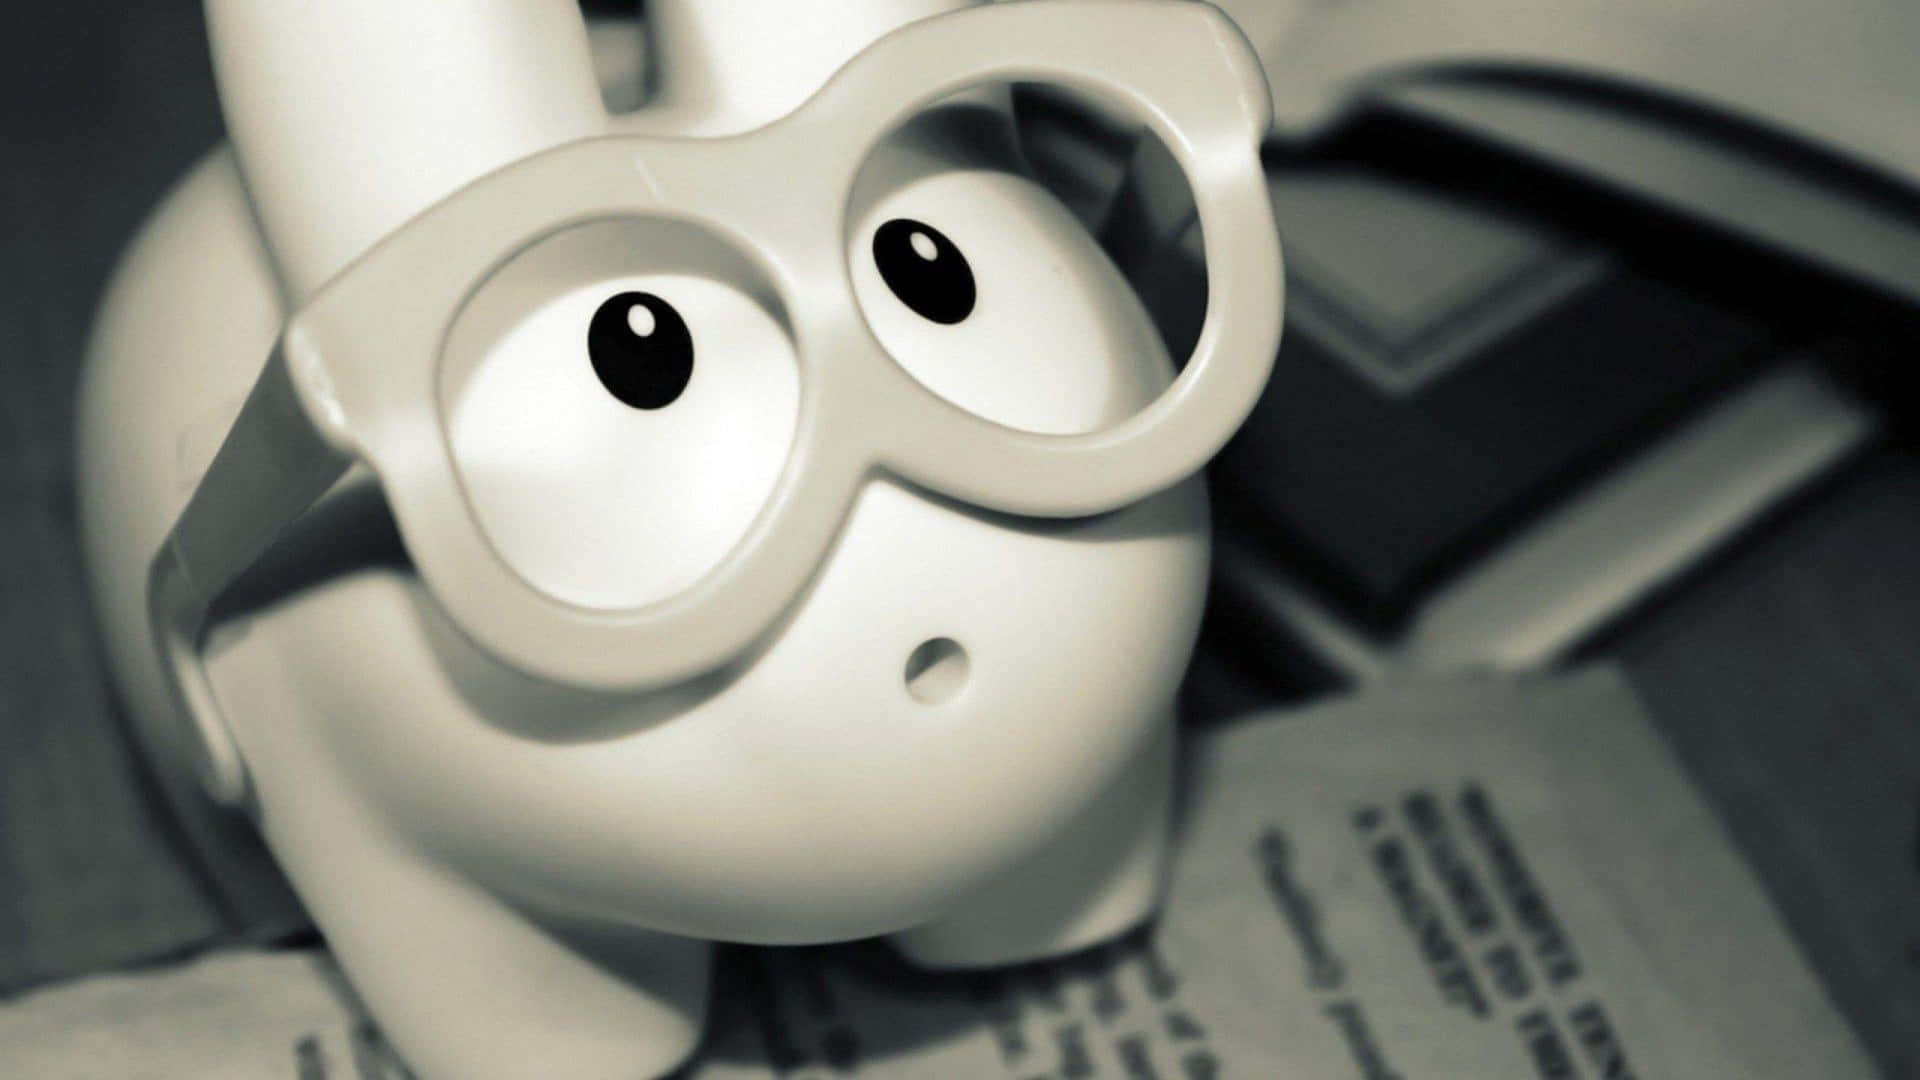 Monochrome Toy With Glasses Wallpaper